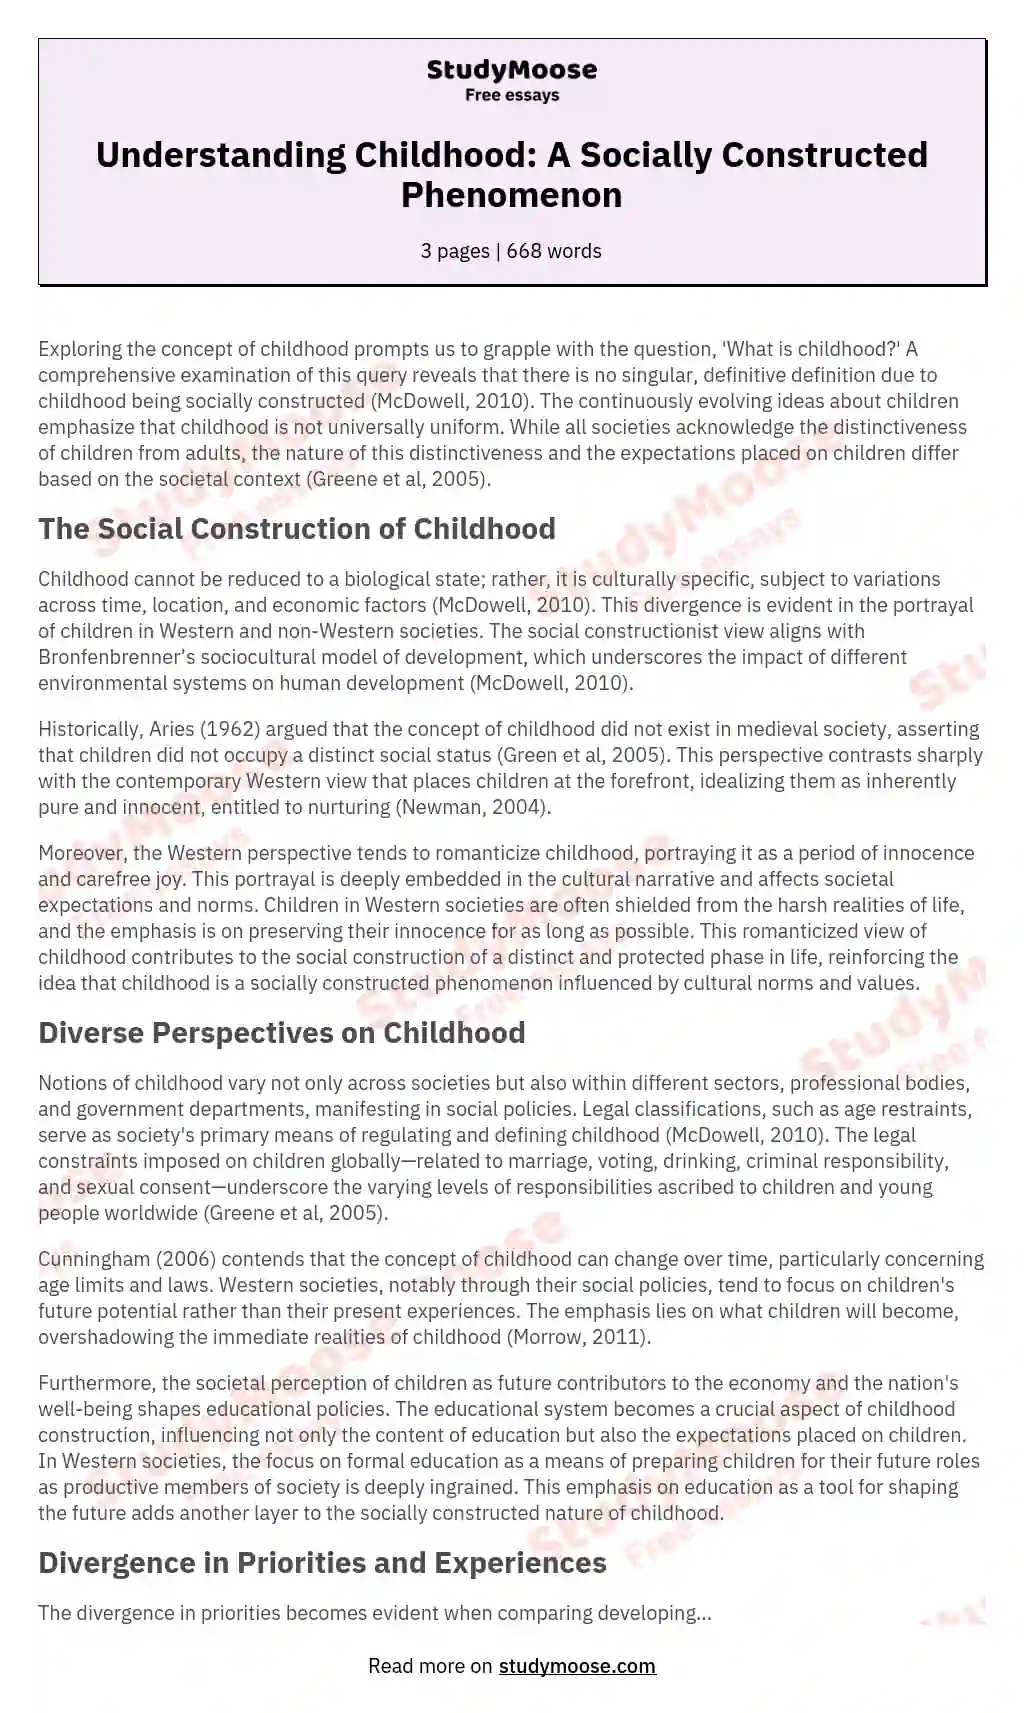 How childhood is socially constructed?